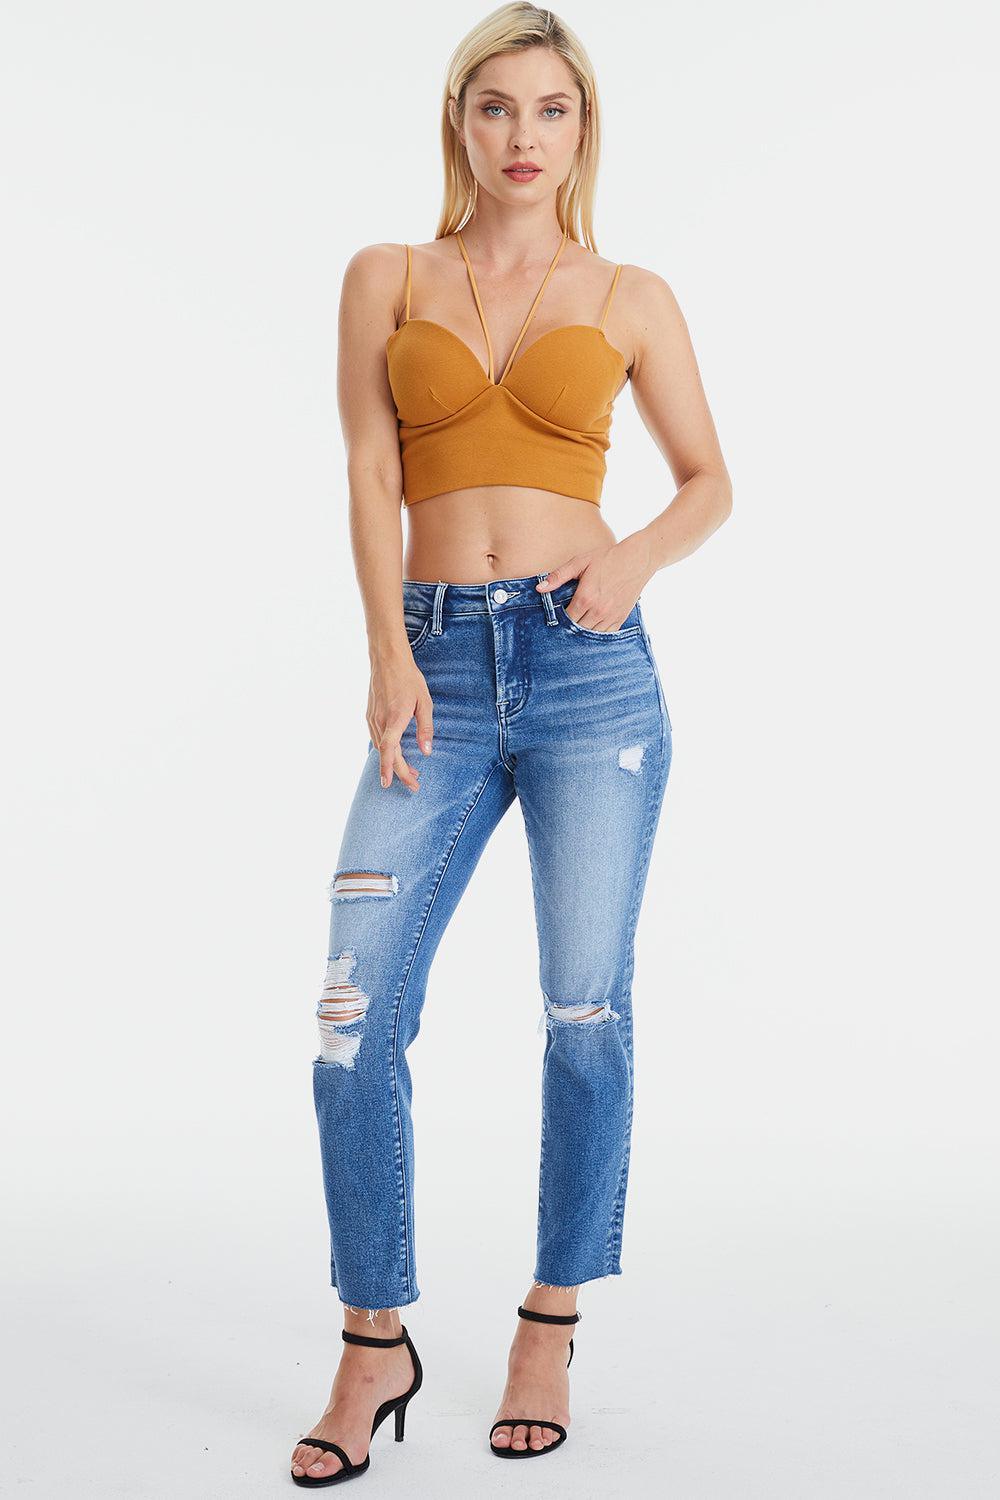 a woman wearing a crop top and ripped jeans